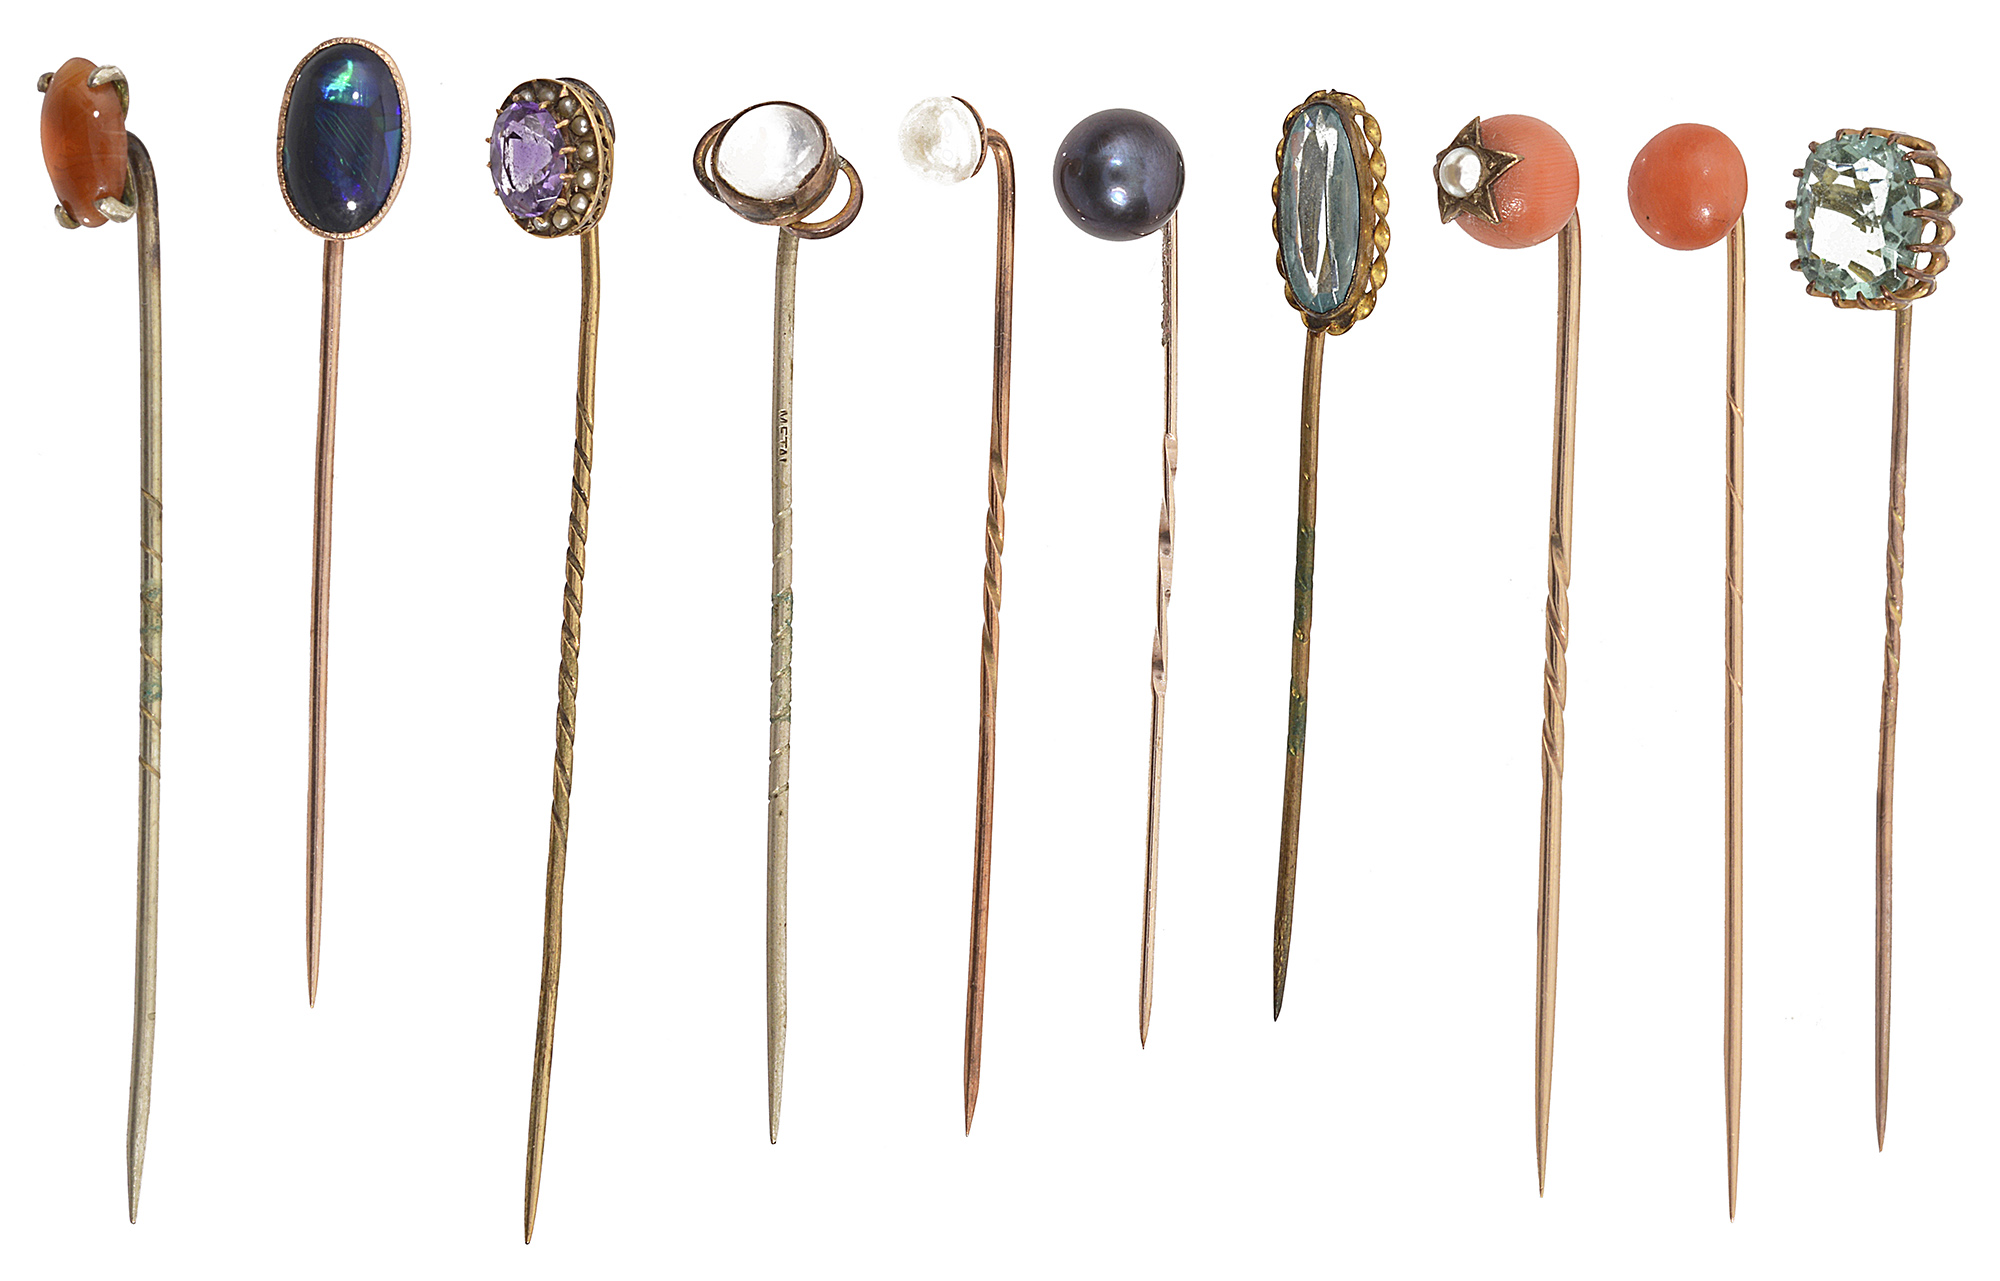 Ten late 19th/early 20th century stick pins